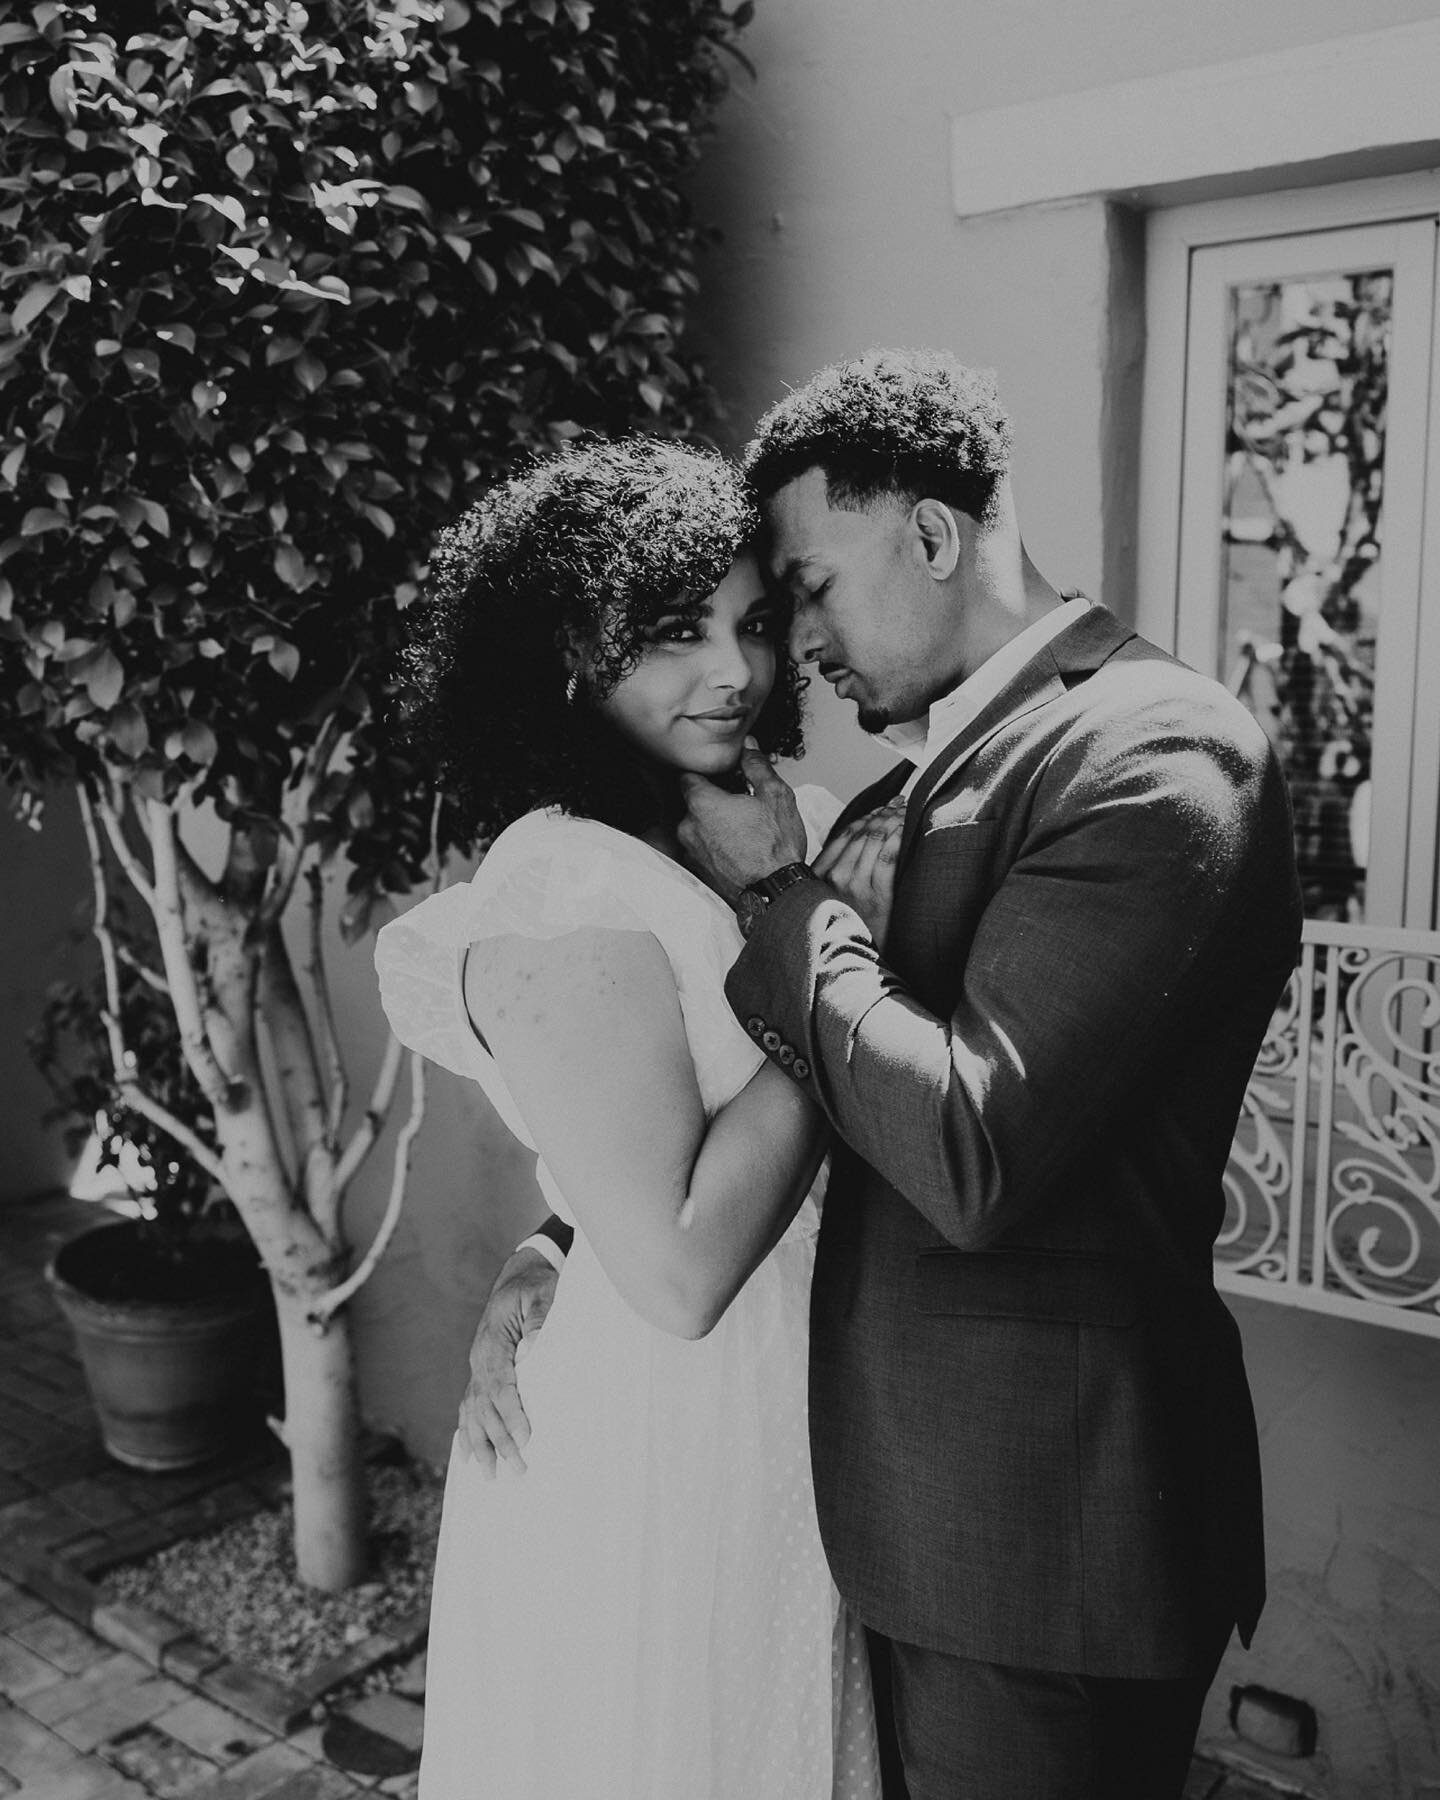 The ABSOLUTE choke hold these two had on me&hellip; the amount of love and admiration I felt while shooting their elopement.. they give me goosebumps 😻
.
.
.
.
.
.

Workshop @lahzehphotography @lahzehphotographyretreat
Bride mrsalowery
Groom @mrjlow